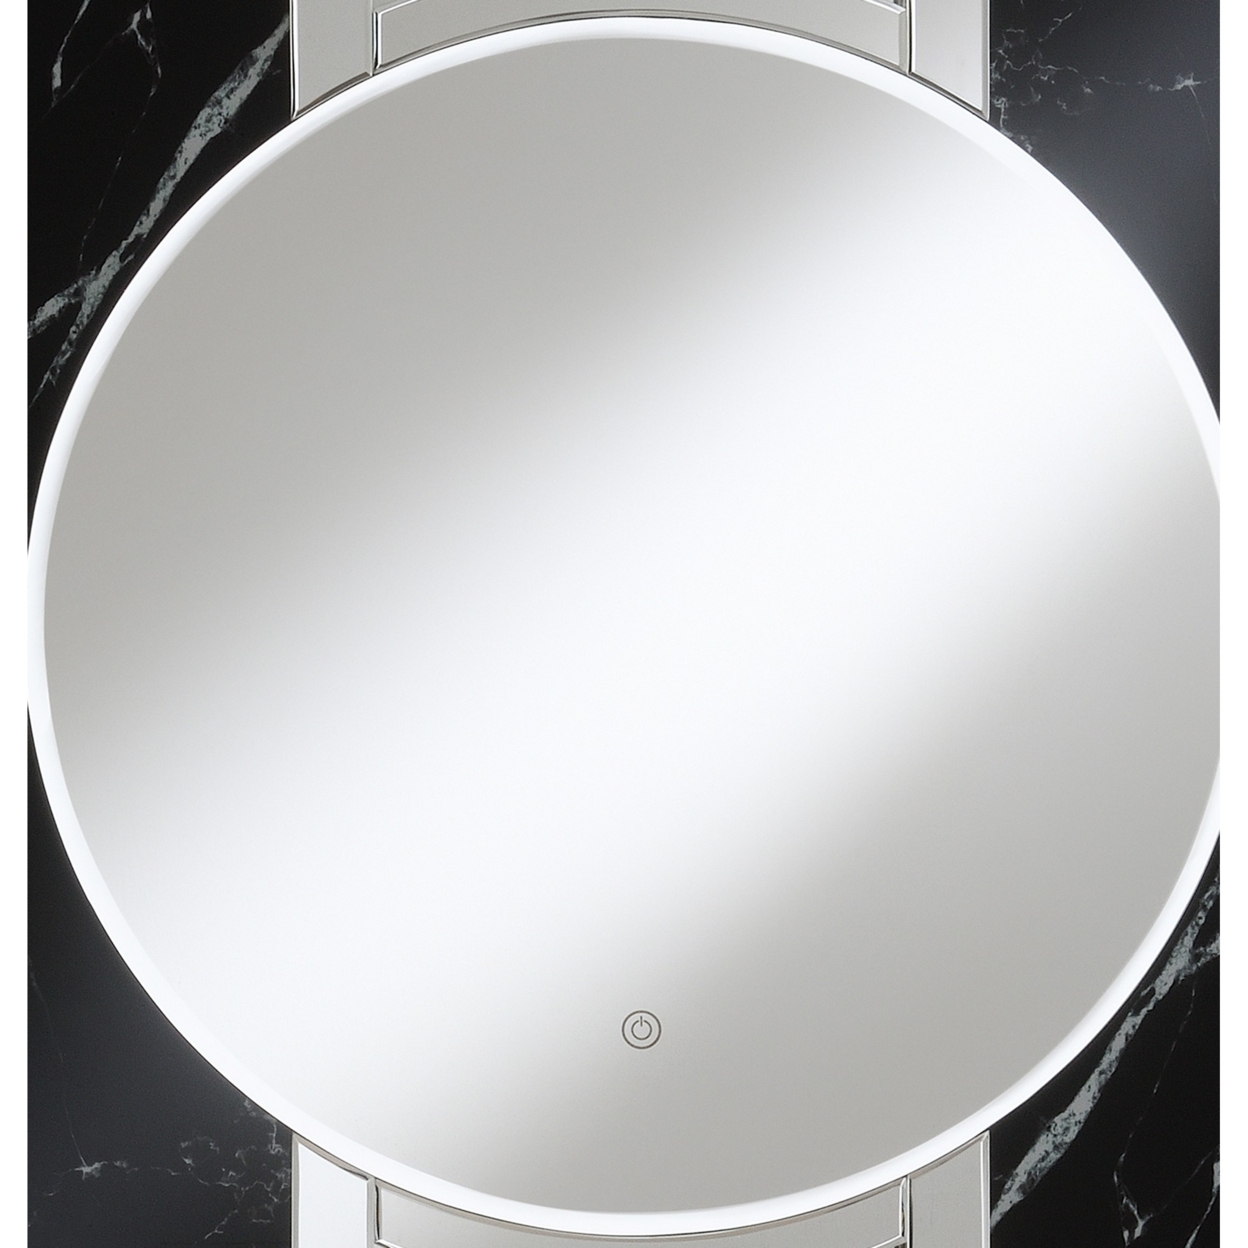 Wall Mirror With Marble Insert And LED Light, Black And Silver- Saltoro Sherpi